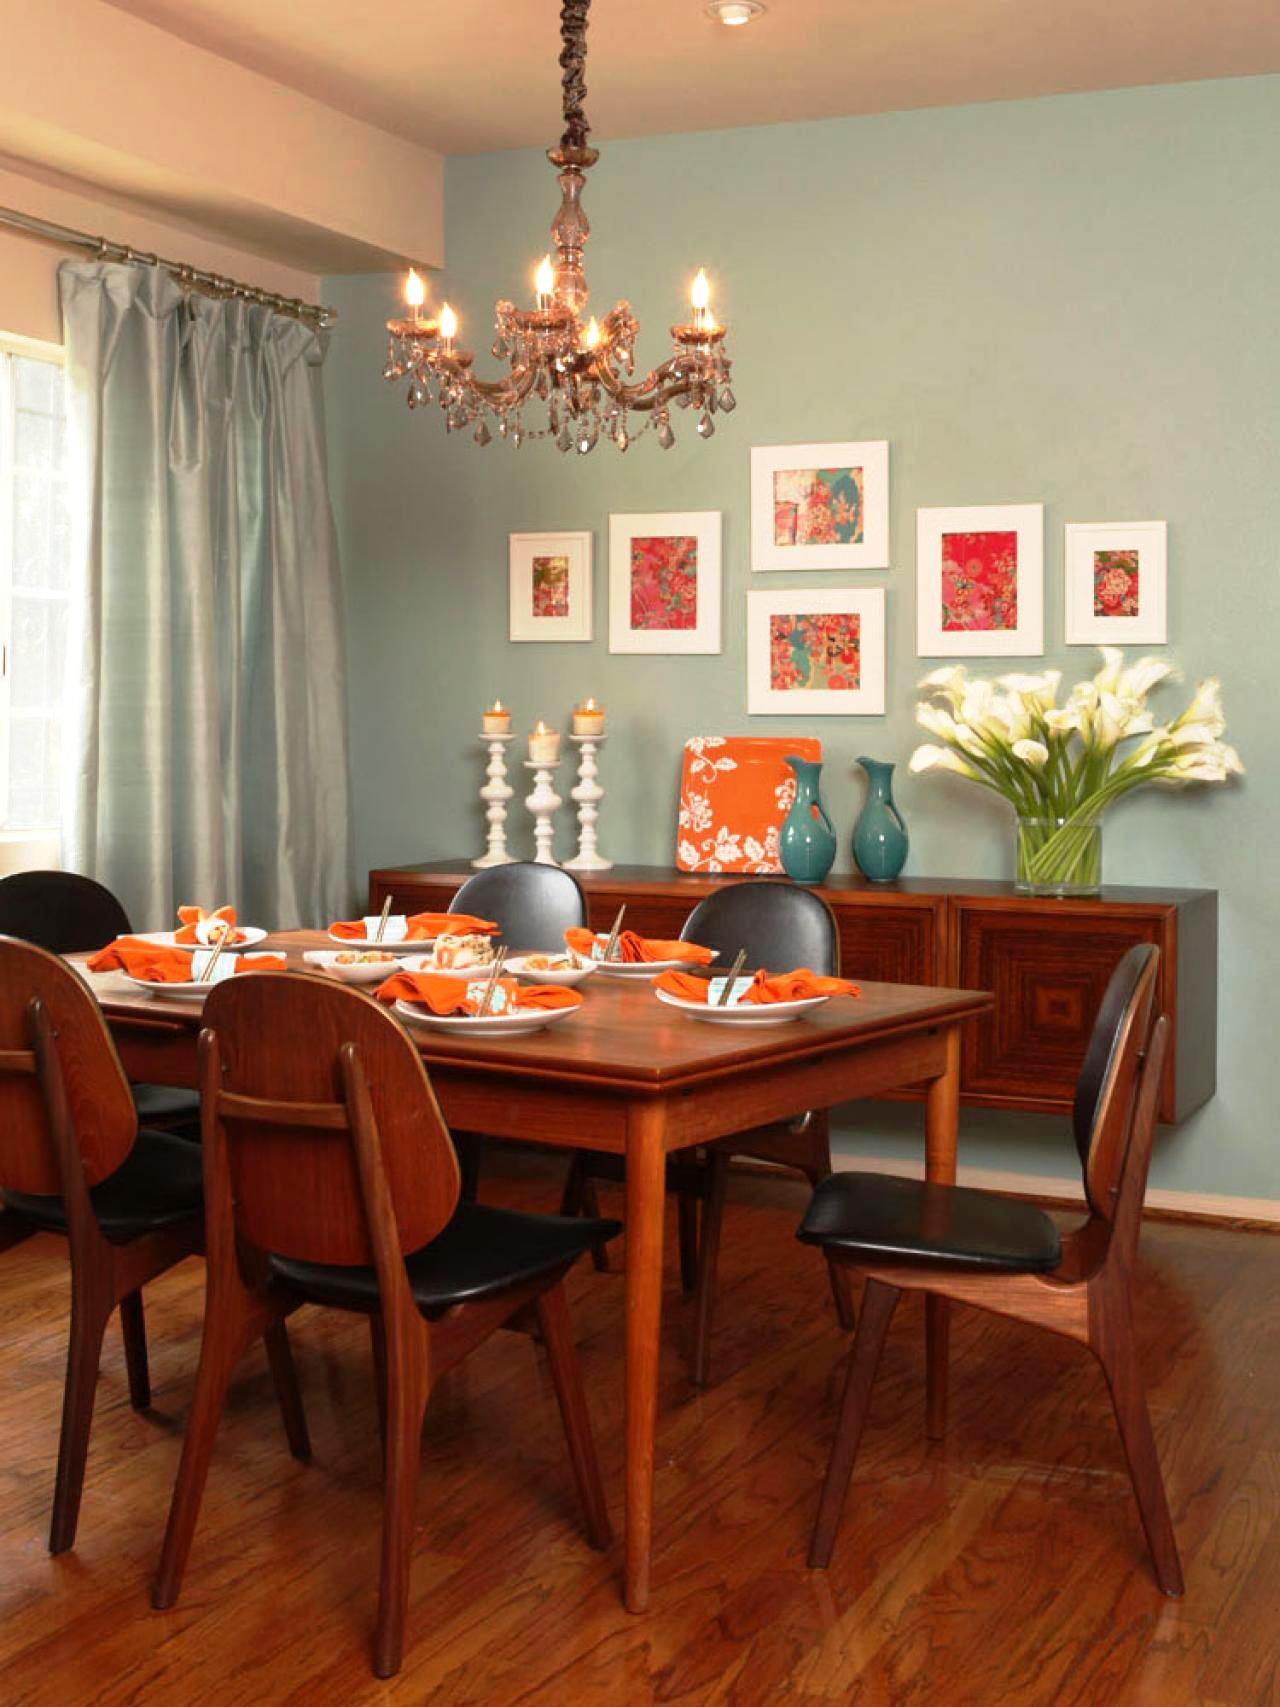 4-Colorful Dining Room